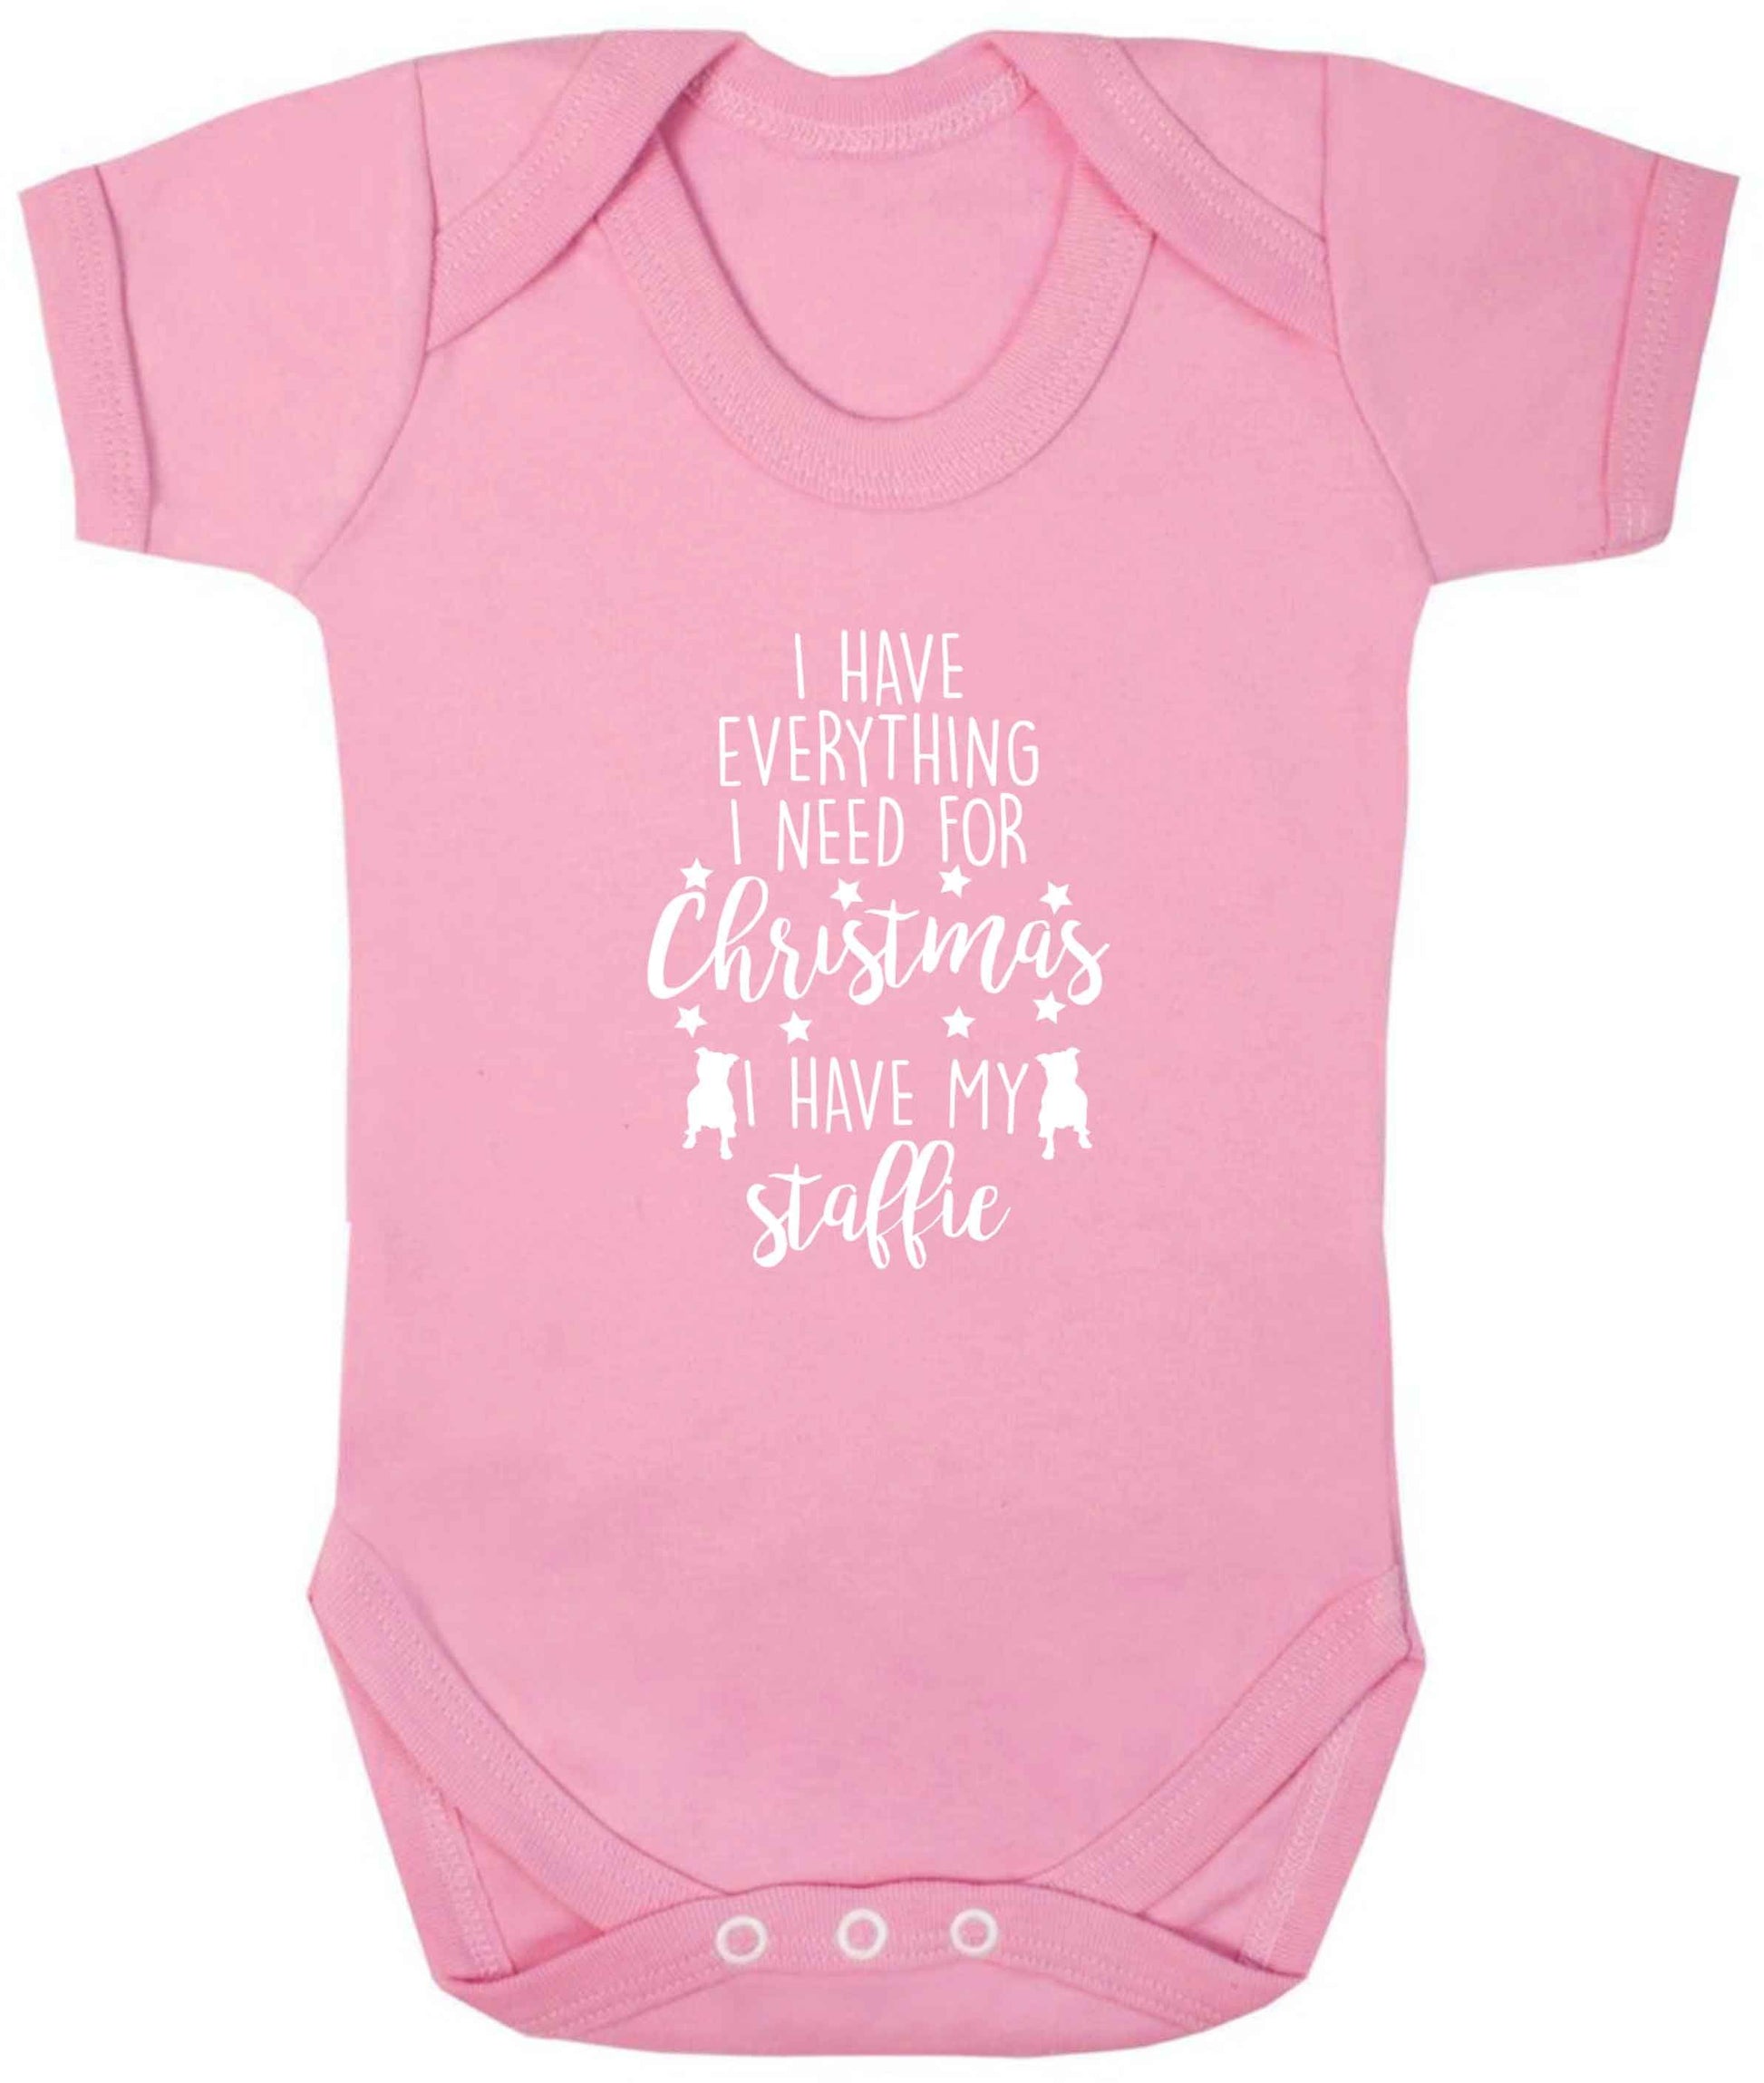 I have everything I need for Christmas I have my staffie baby vest pale pink 18-24 months